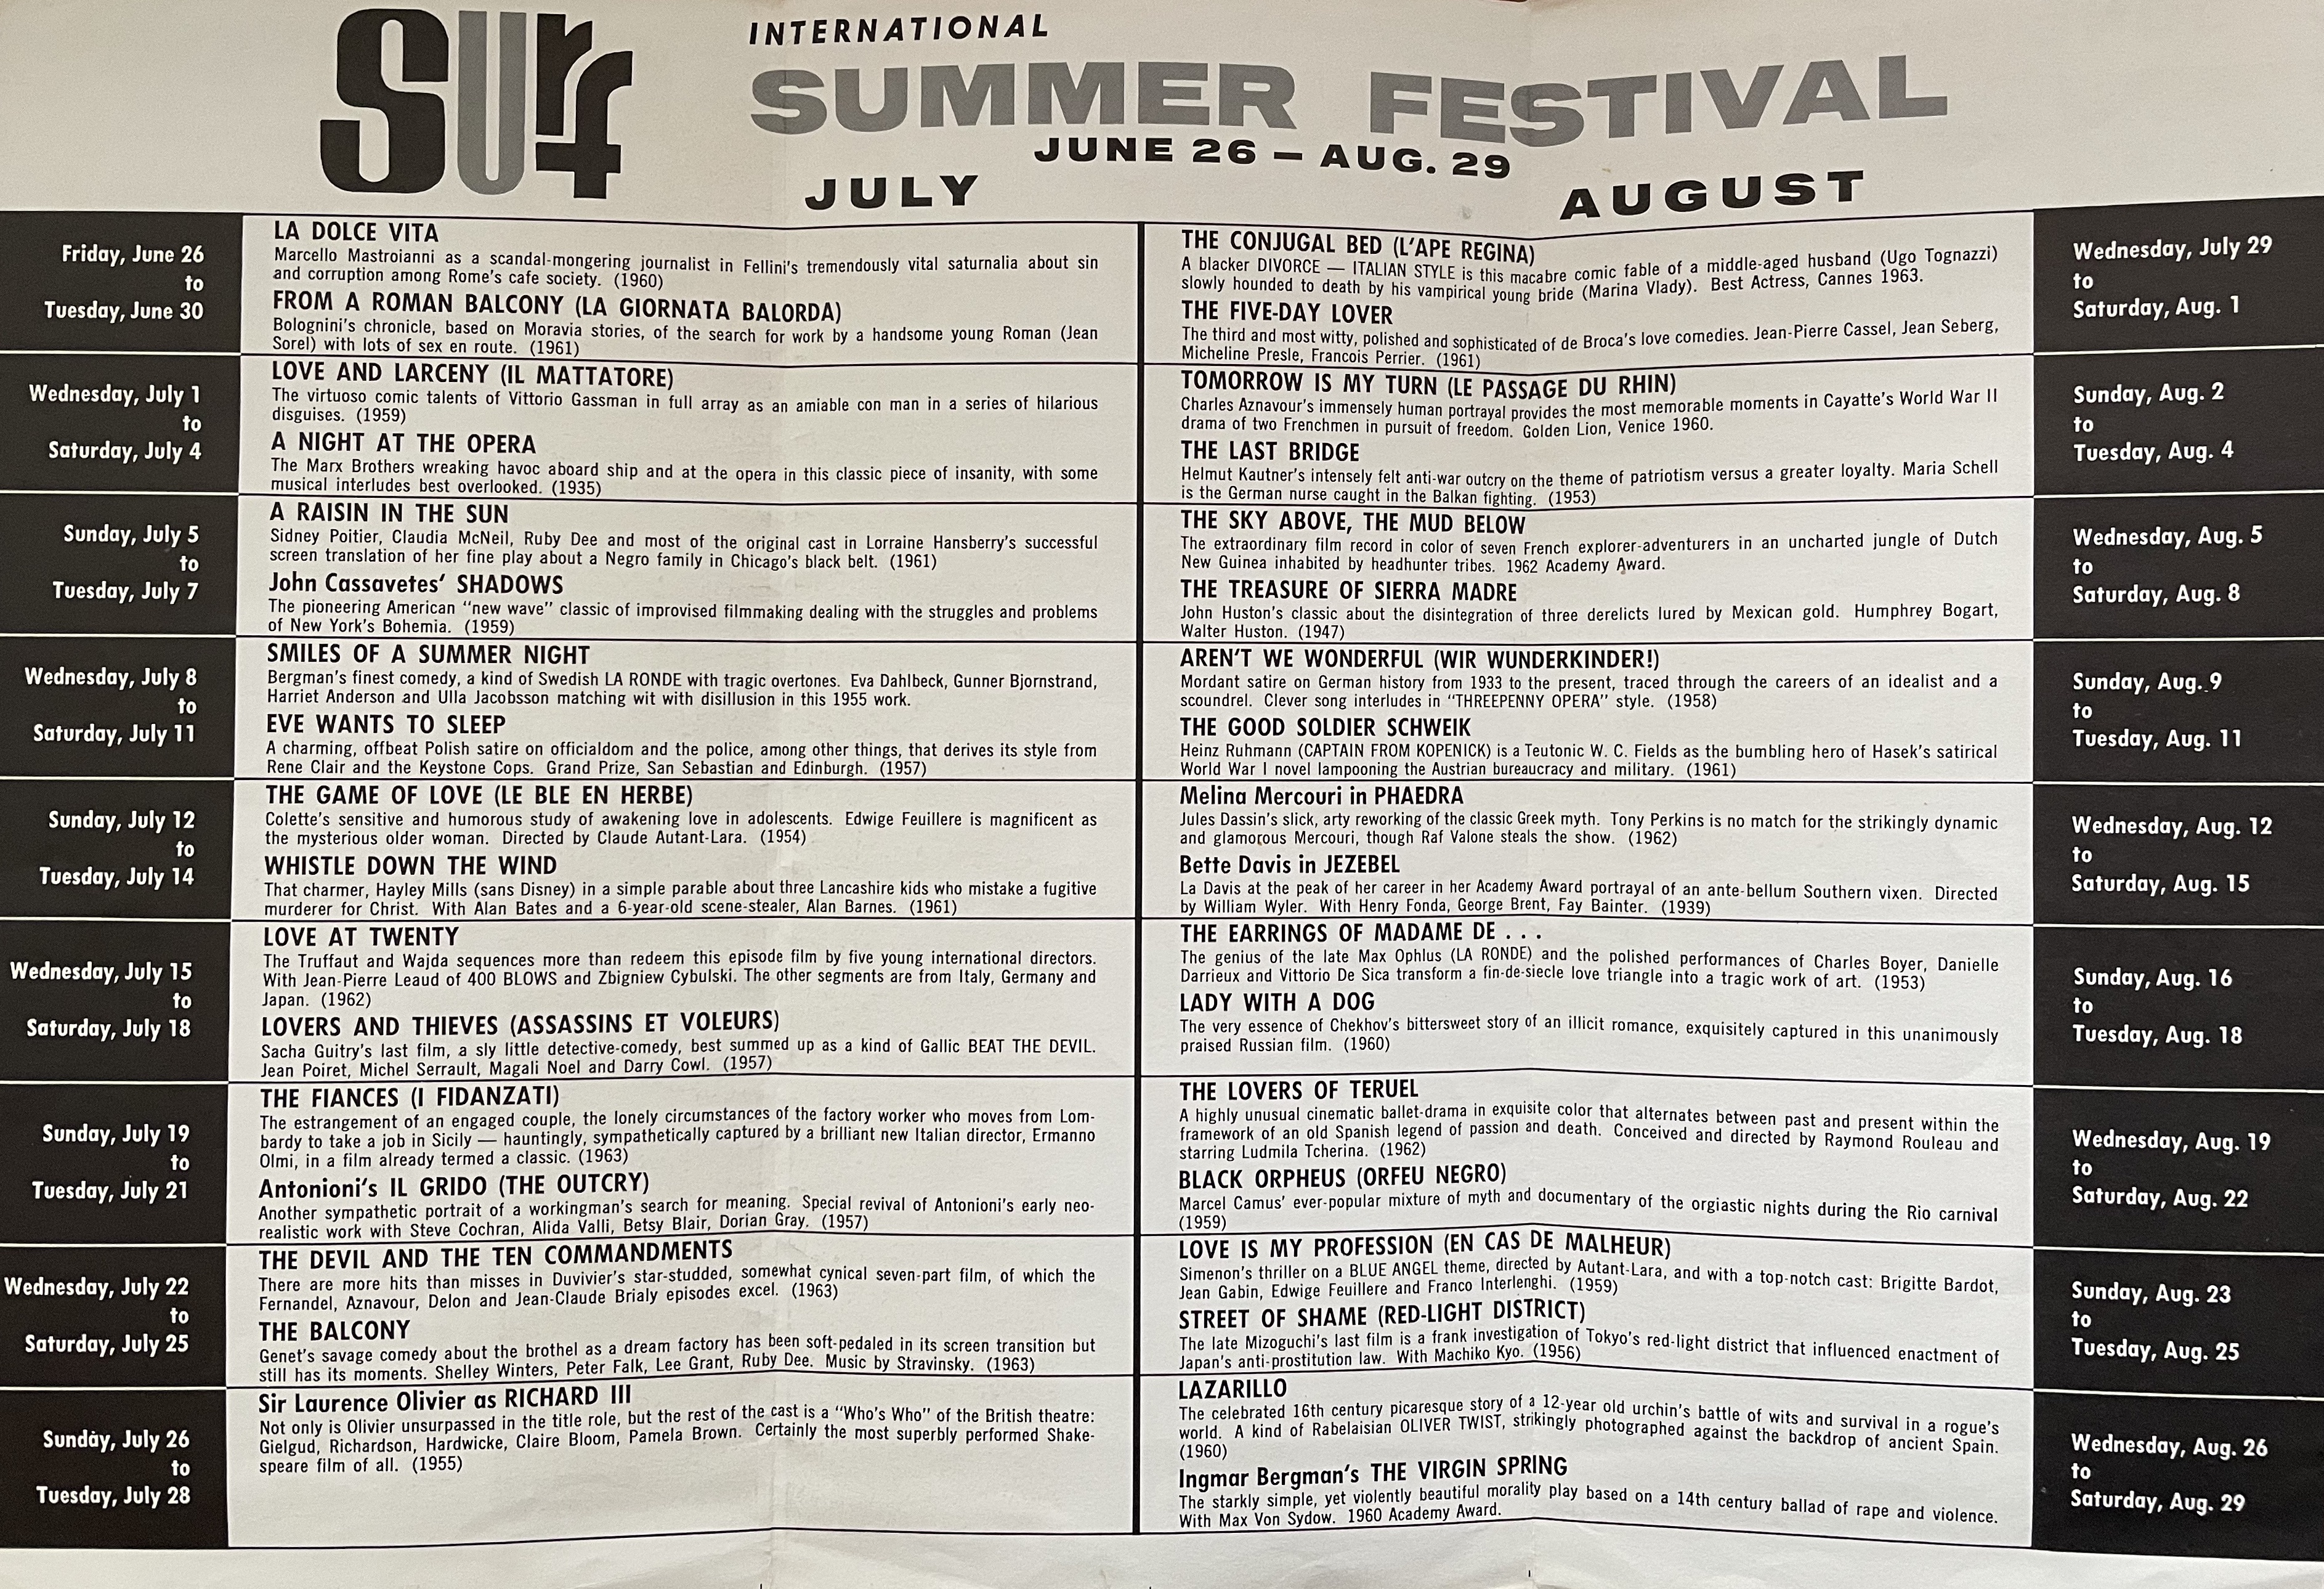 1964 Summer screening listings for the Surf Theatre in San Francisco